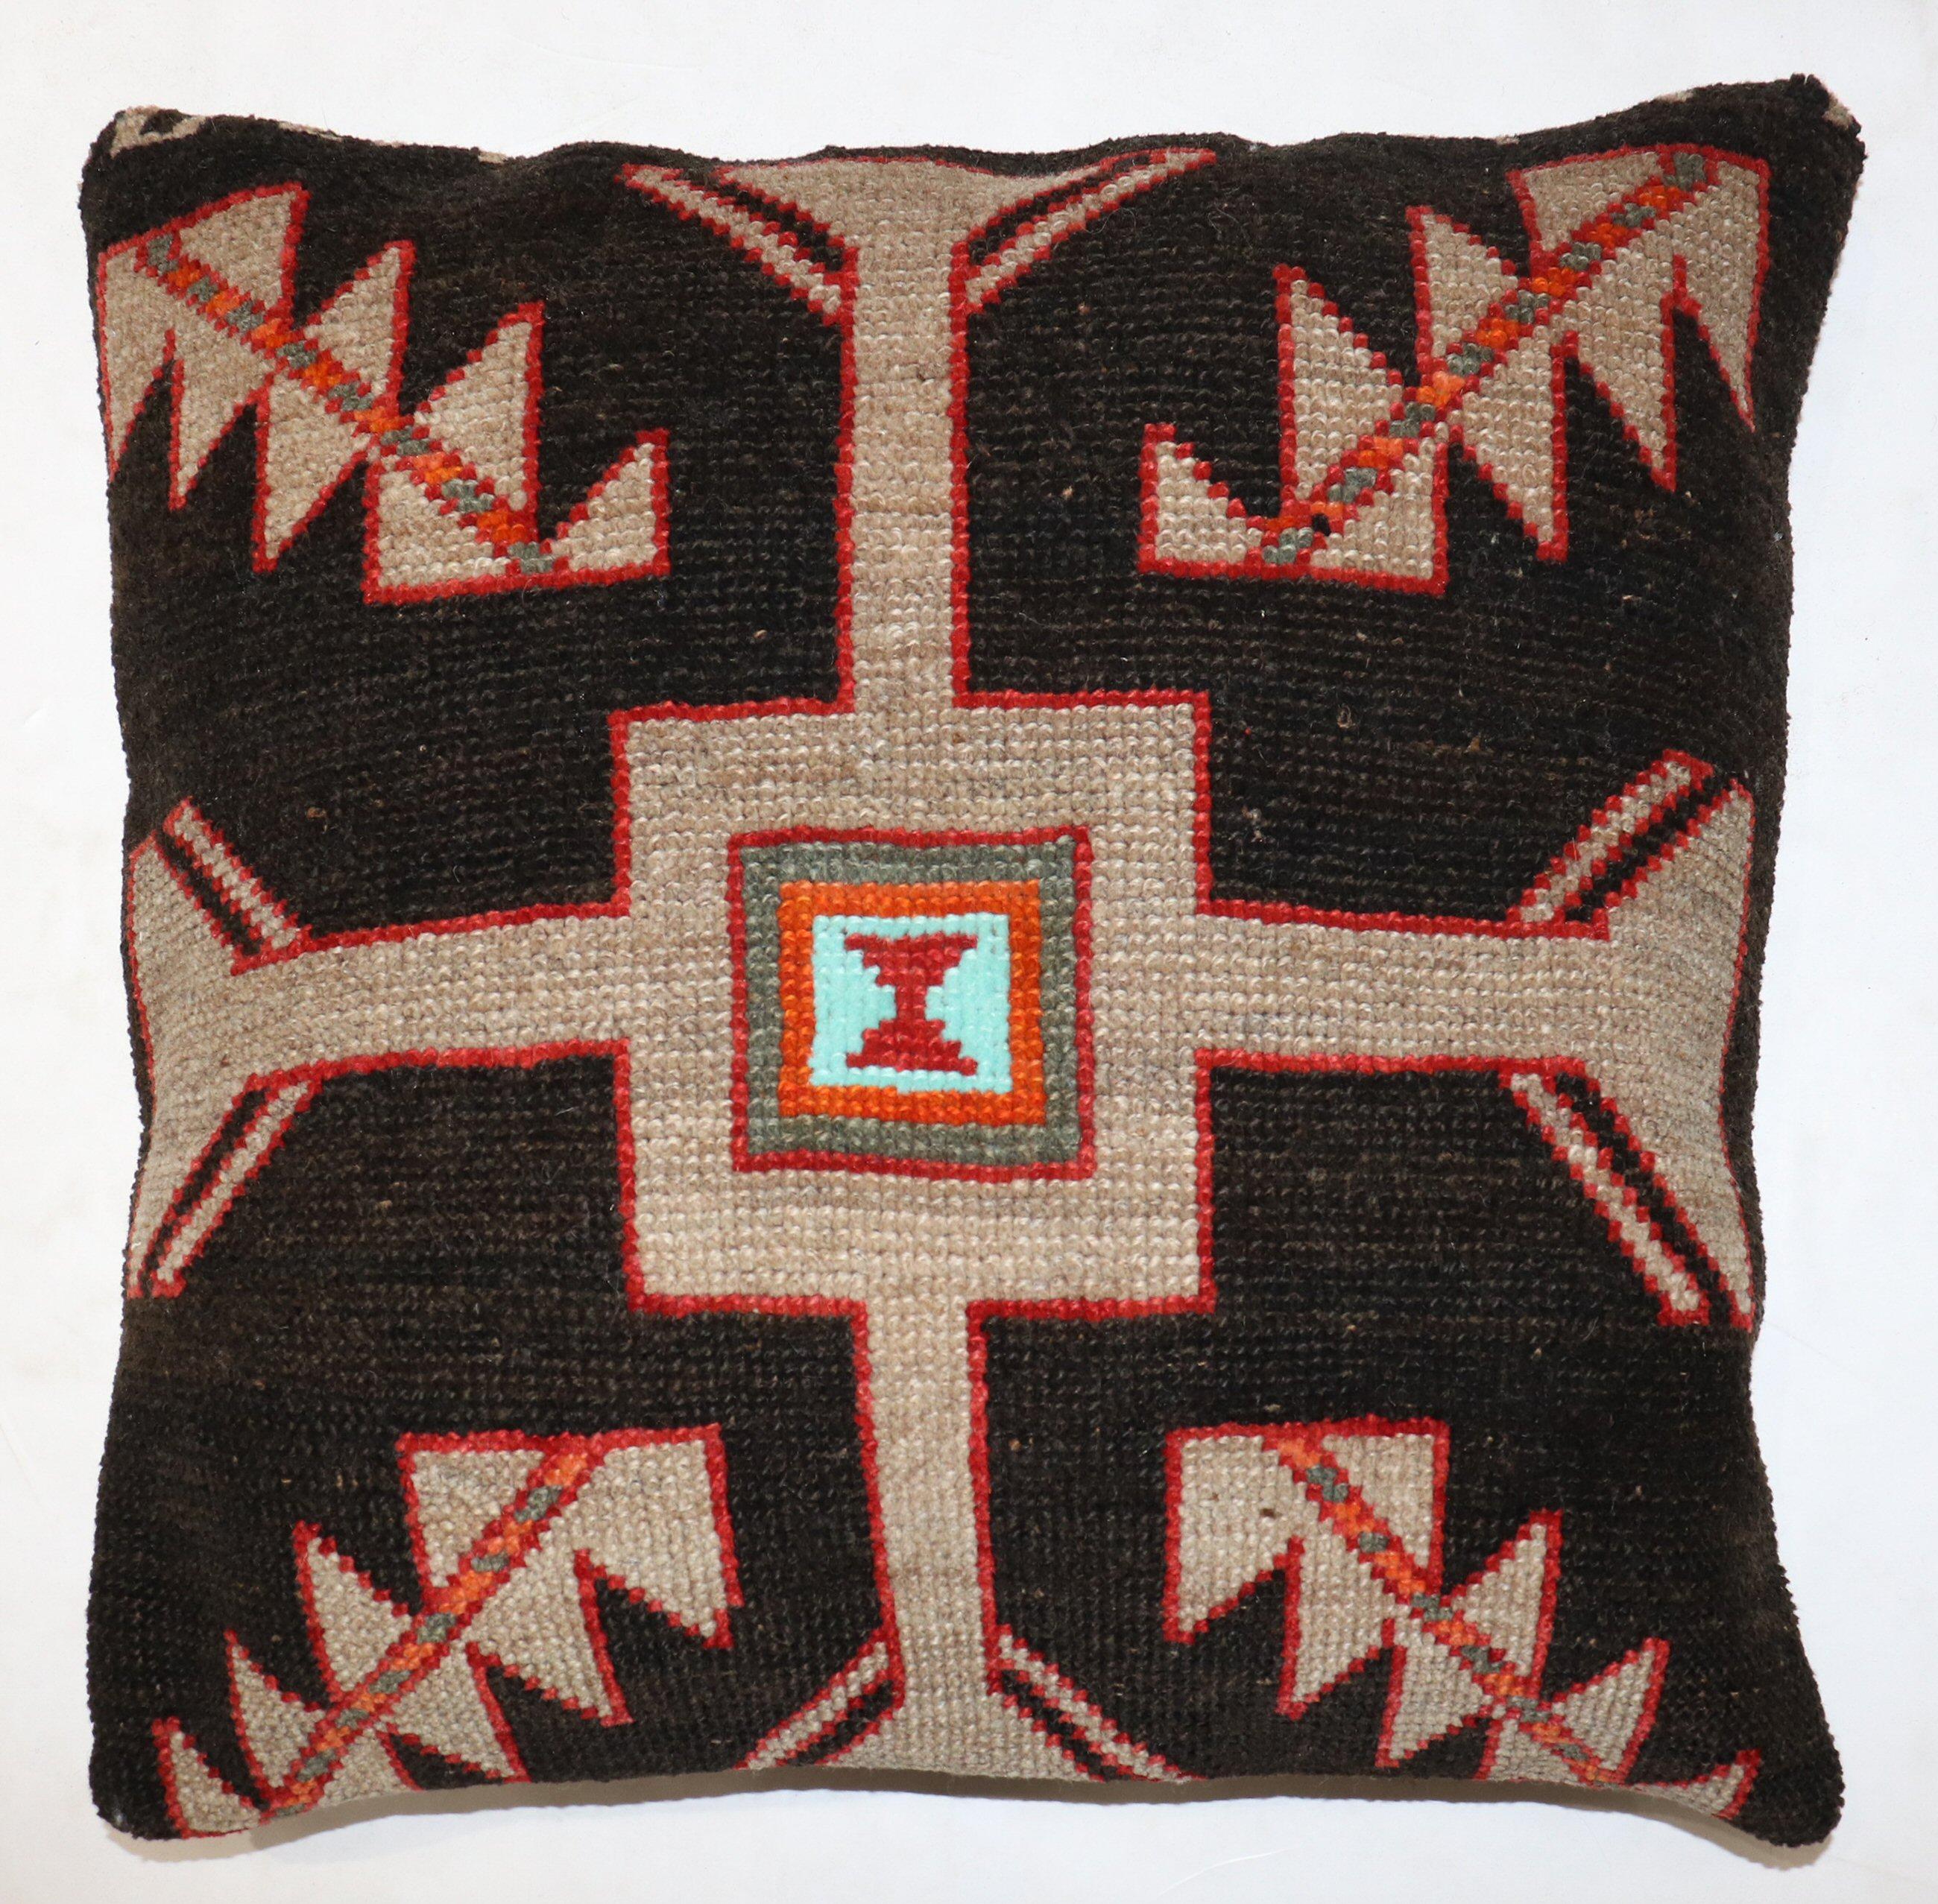 Pillow made from a mid 20th century turkish rug

size 2' x 2' 4